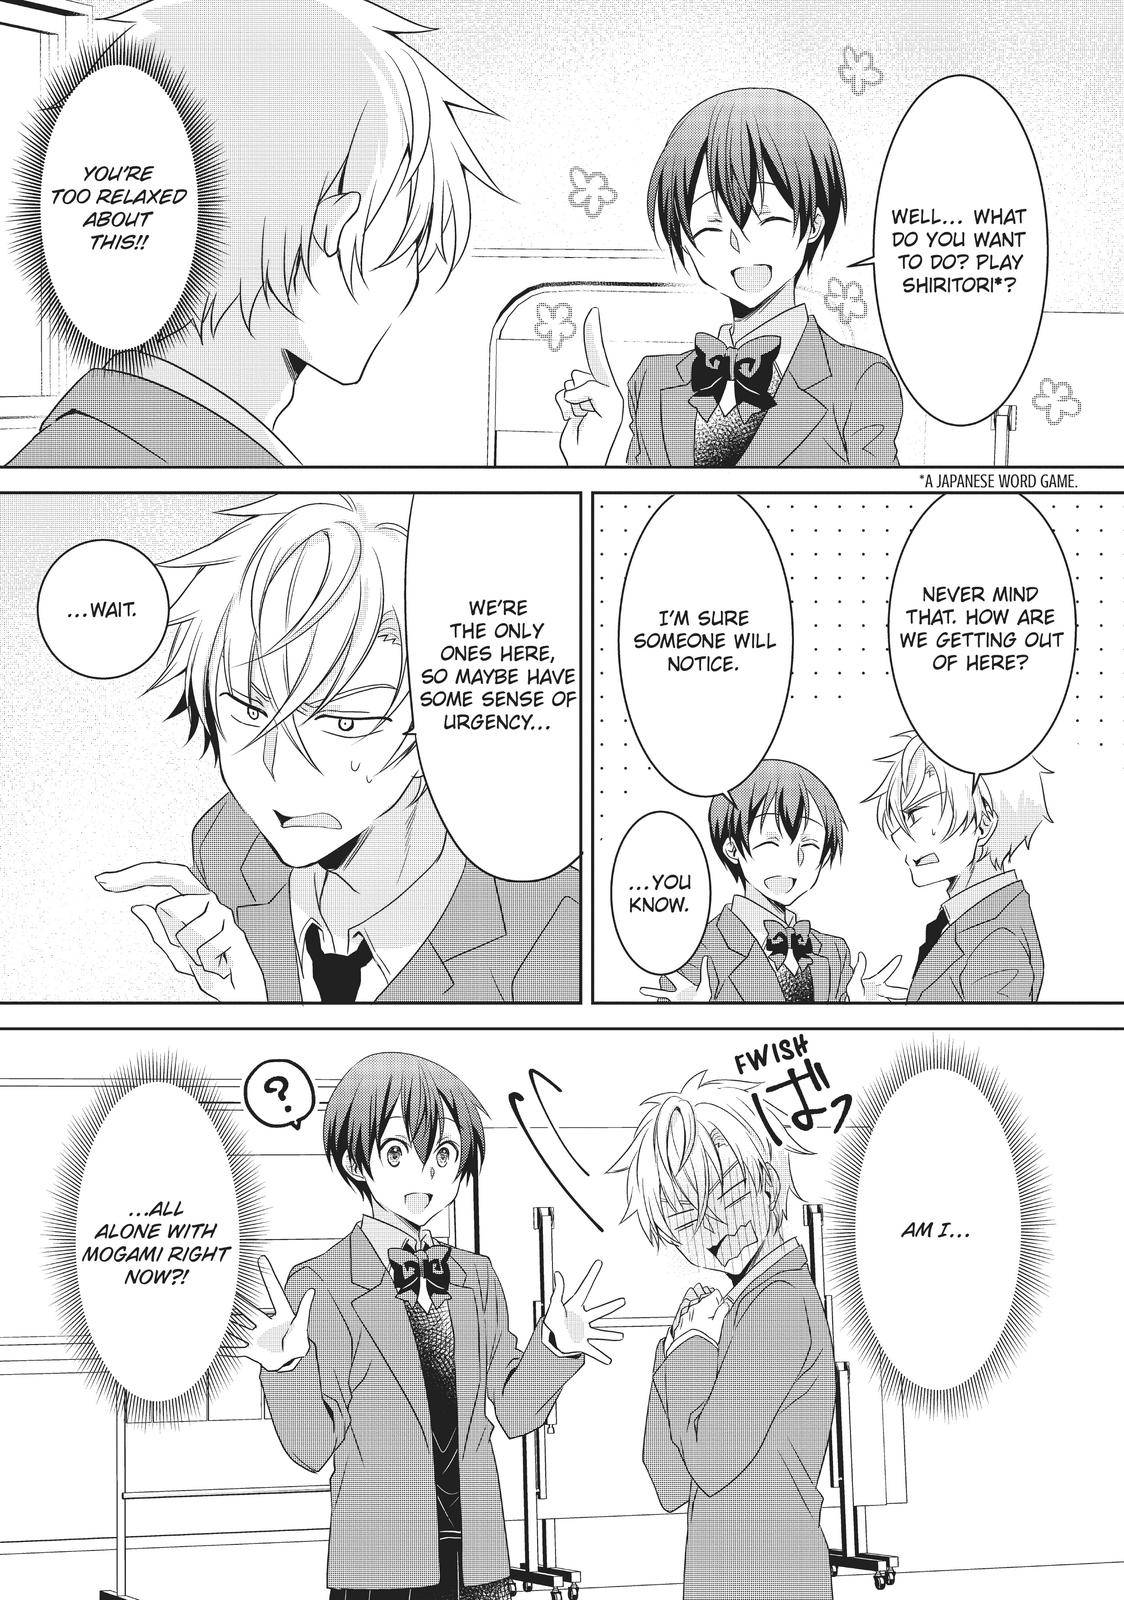 The Story Of The Girl I Like Being Too Ikemen - chapter 8 - #2